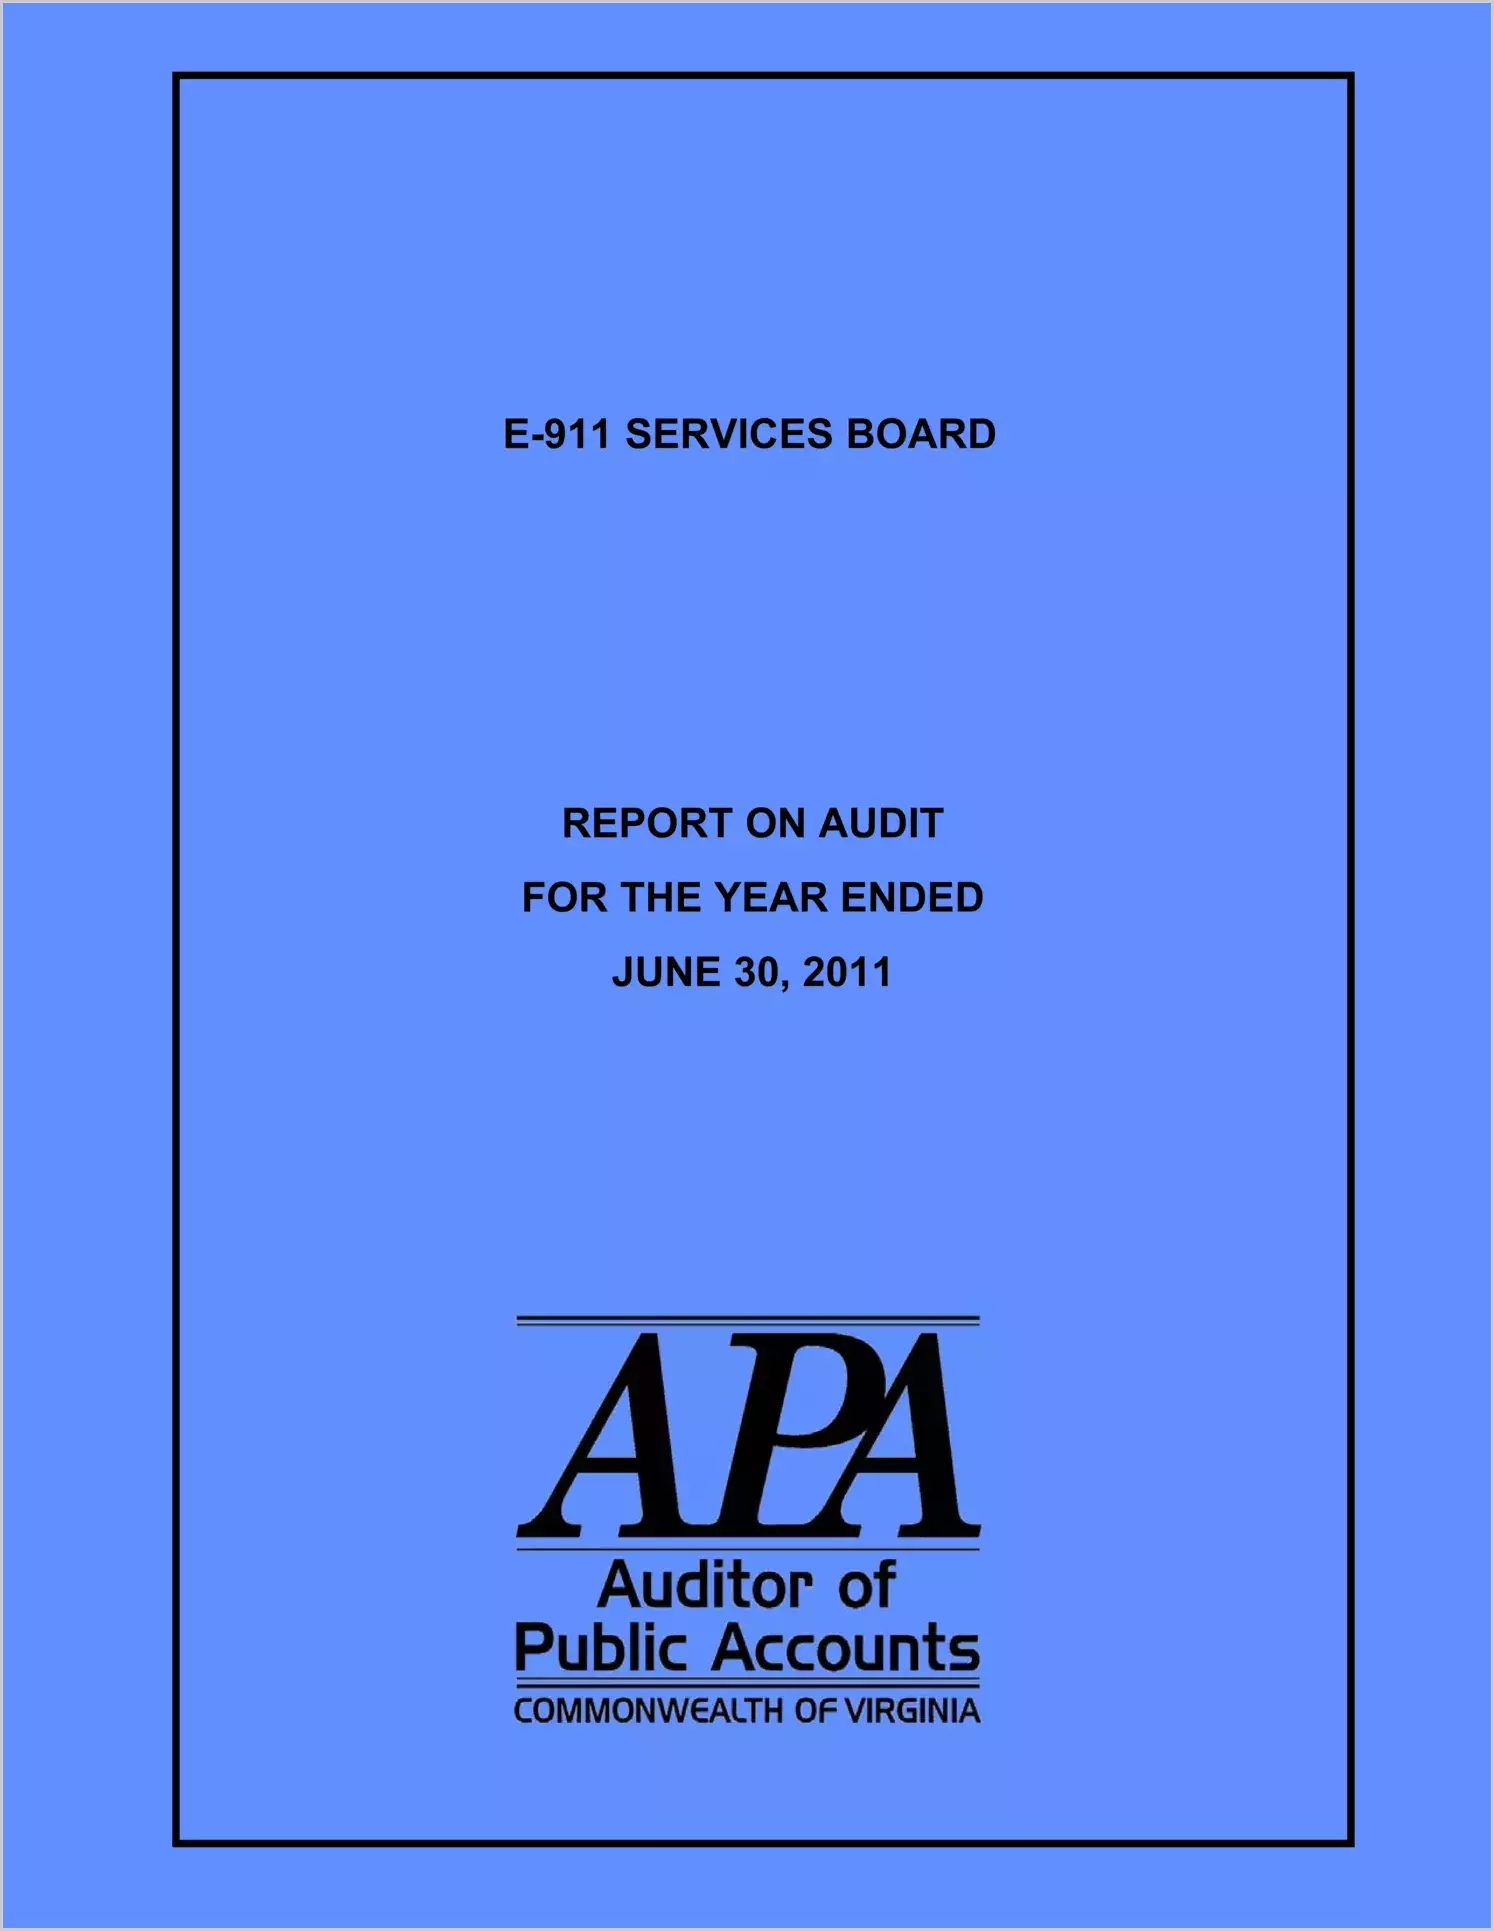 Wireless E-911 Services Board report on audit for the year ended June 30, 2011